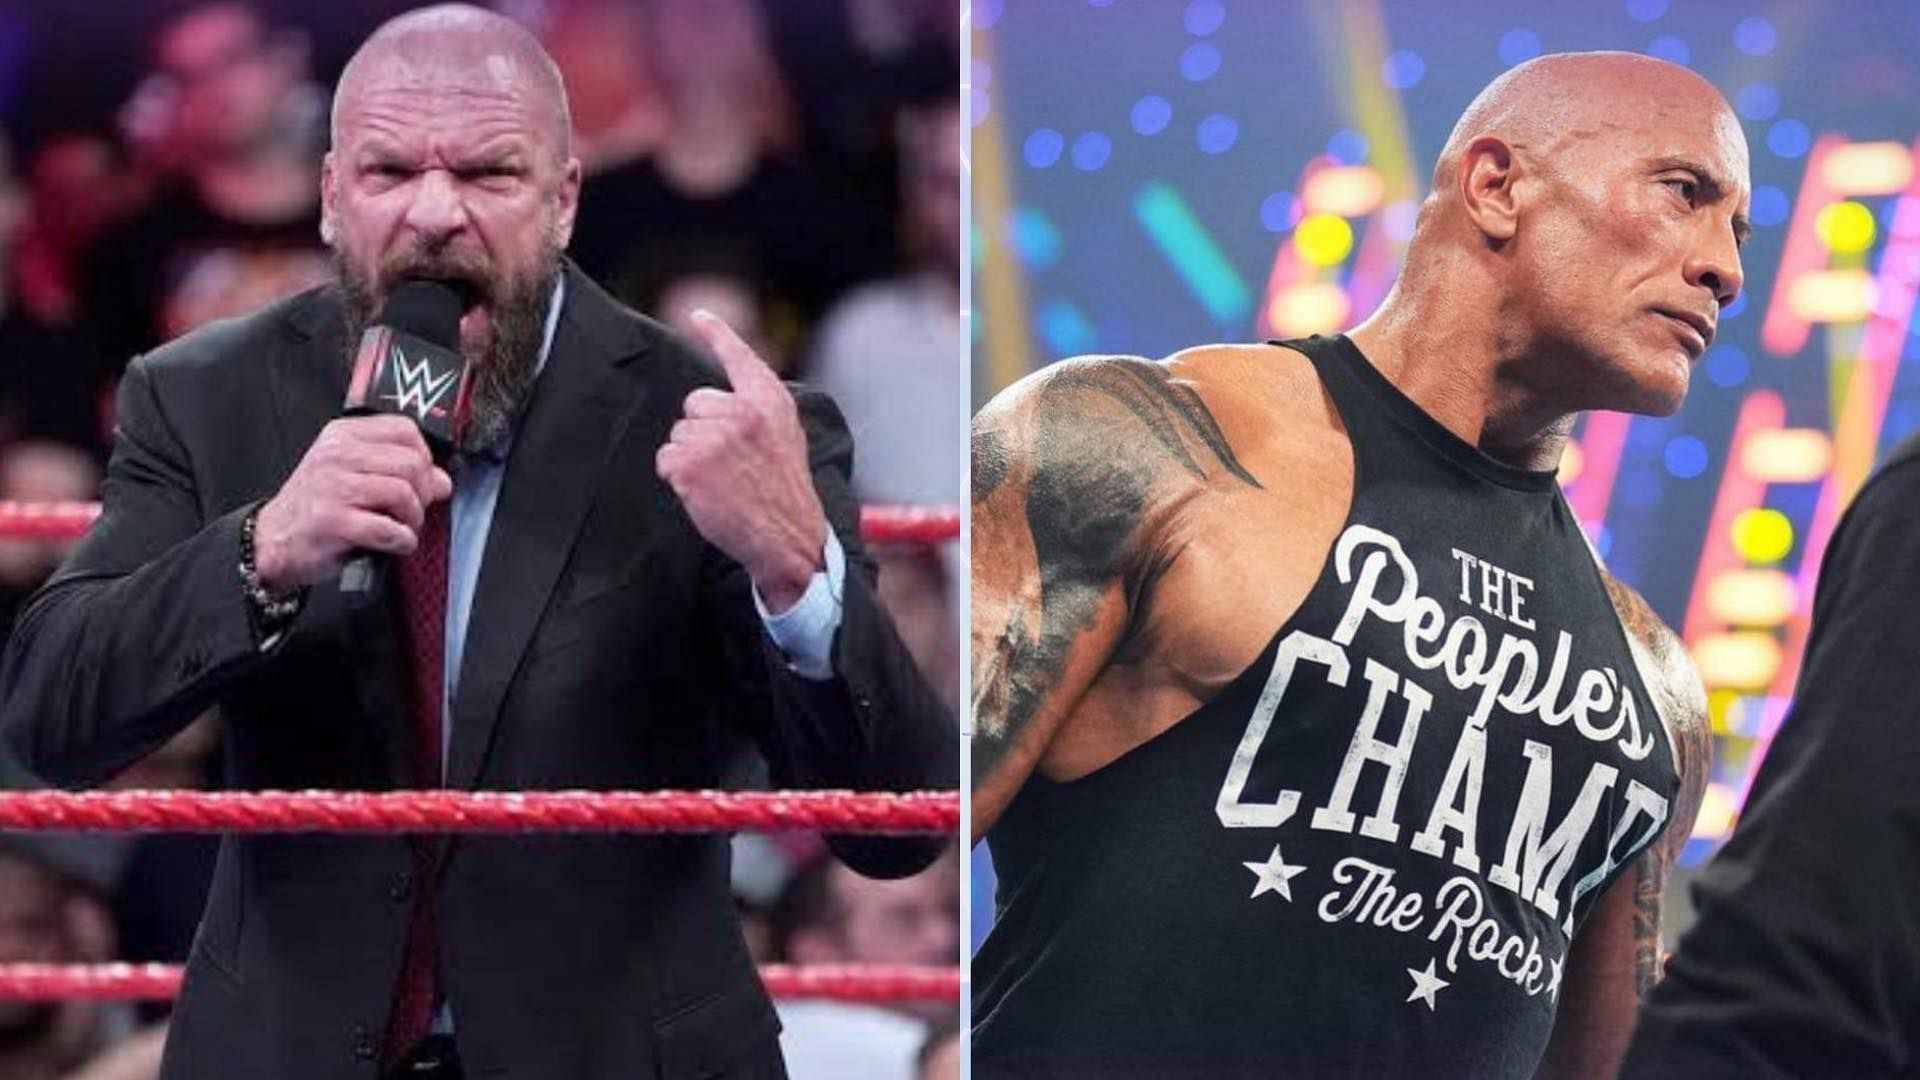 The Rock reacts to Triple H's message before WWE RAW